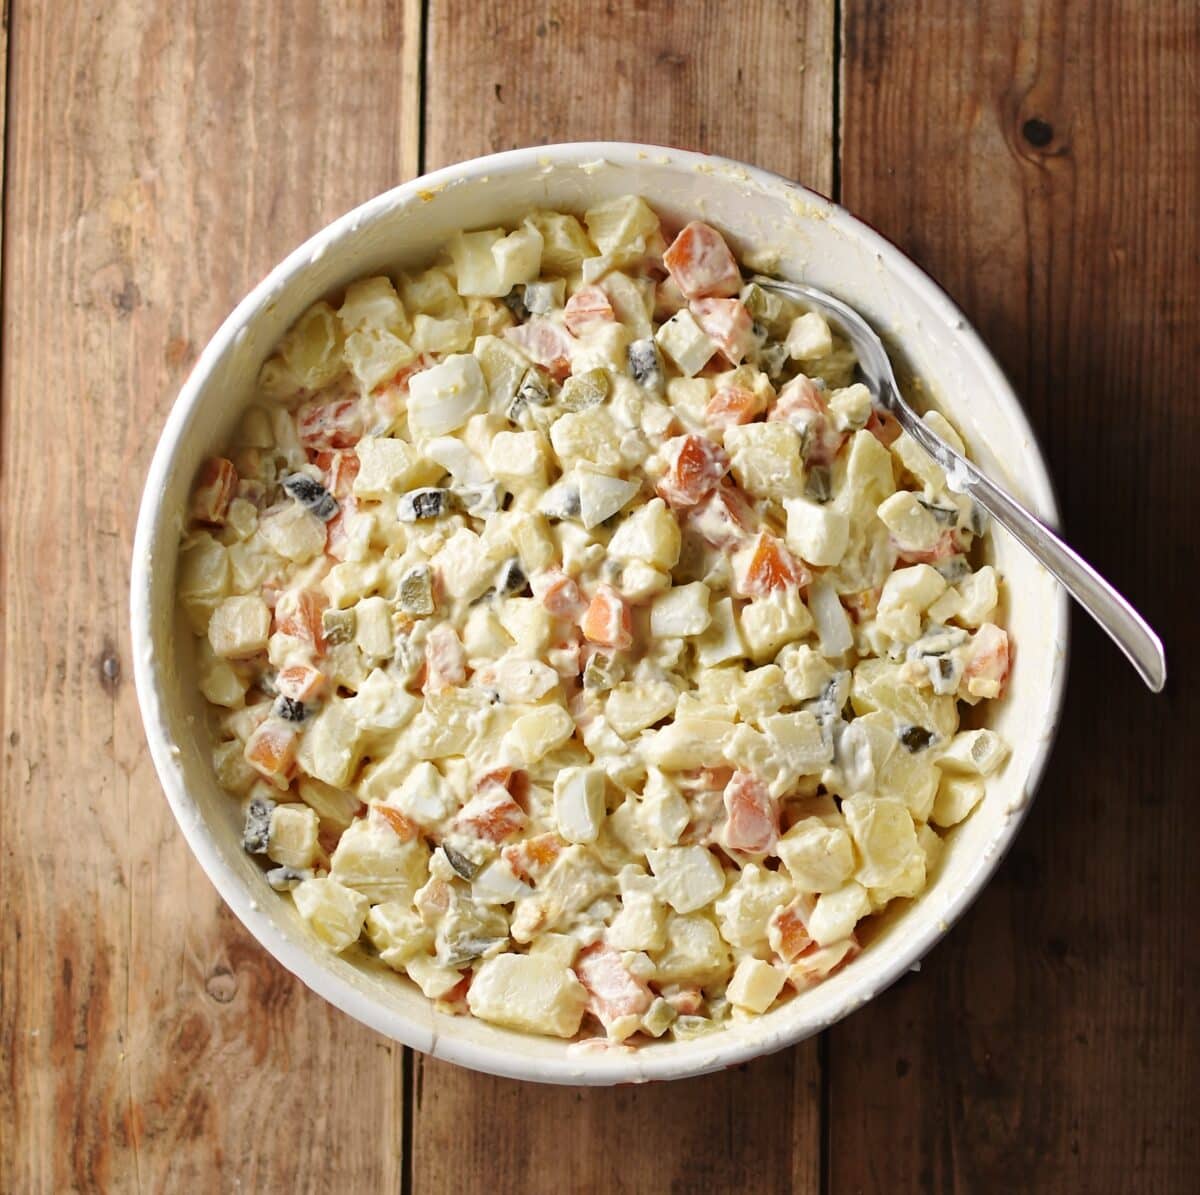 Top down view of potato salad with spoon inside large white bowl.